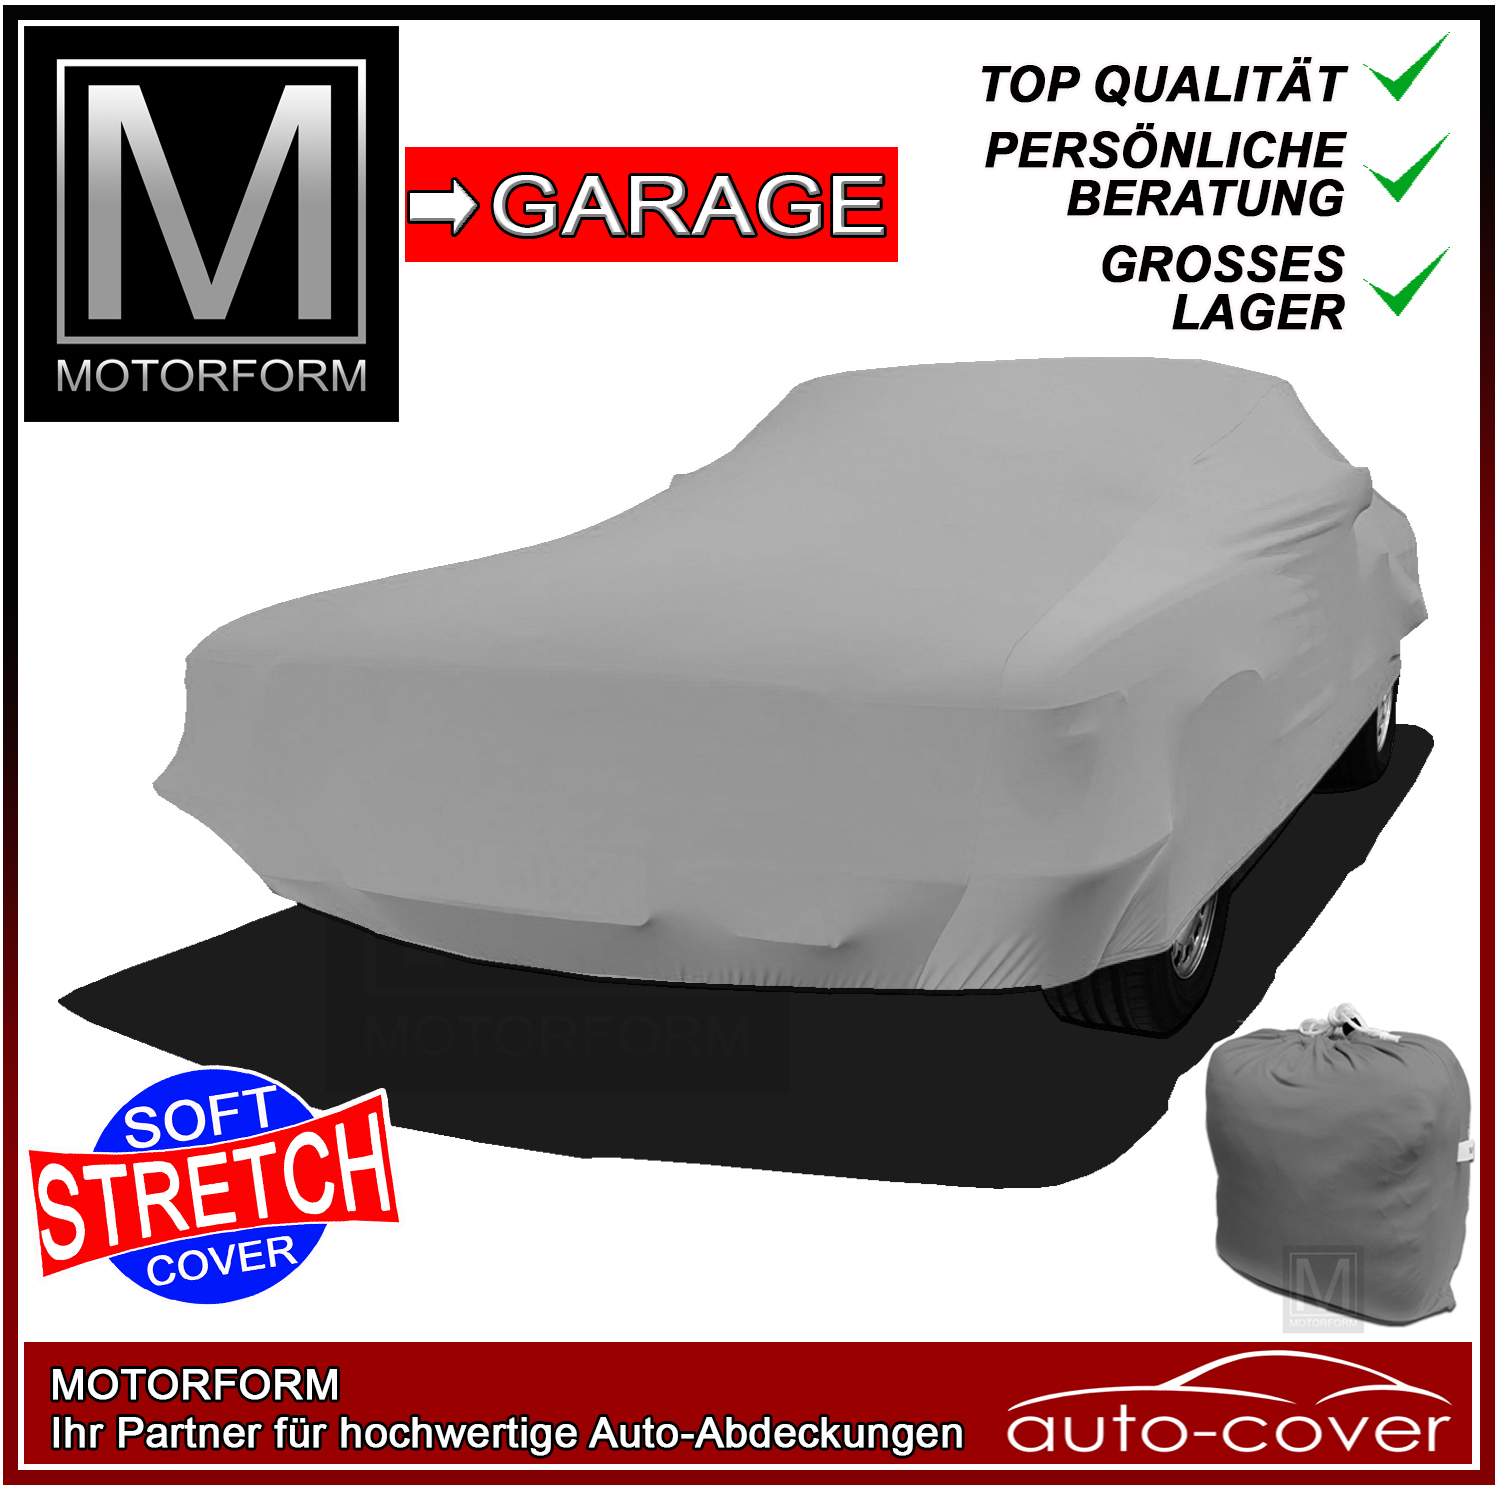 Grey Super Stretchy Cover for Abarth (Fiat) 500 Classic 595 63-7